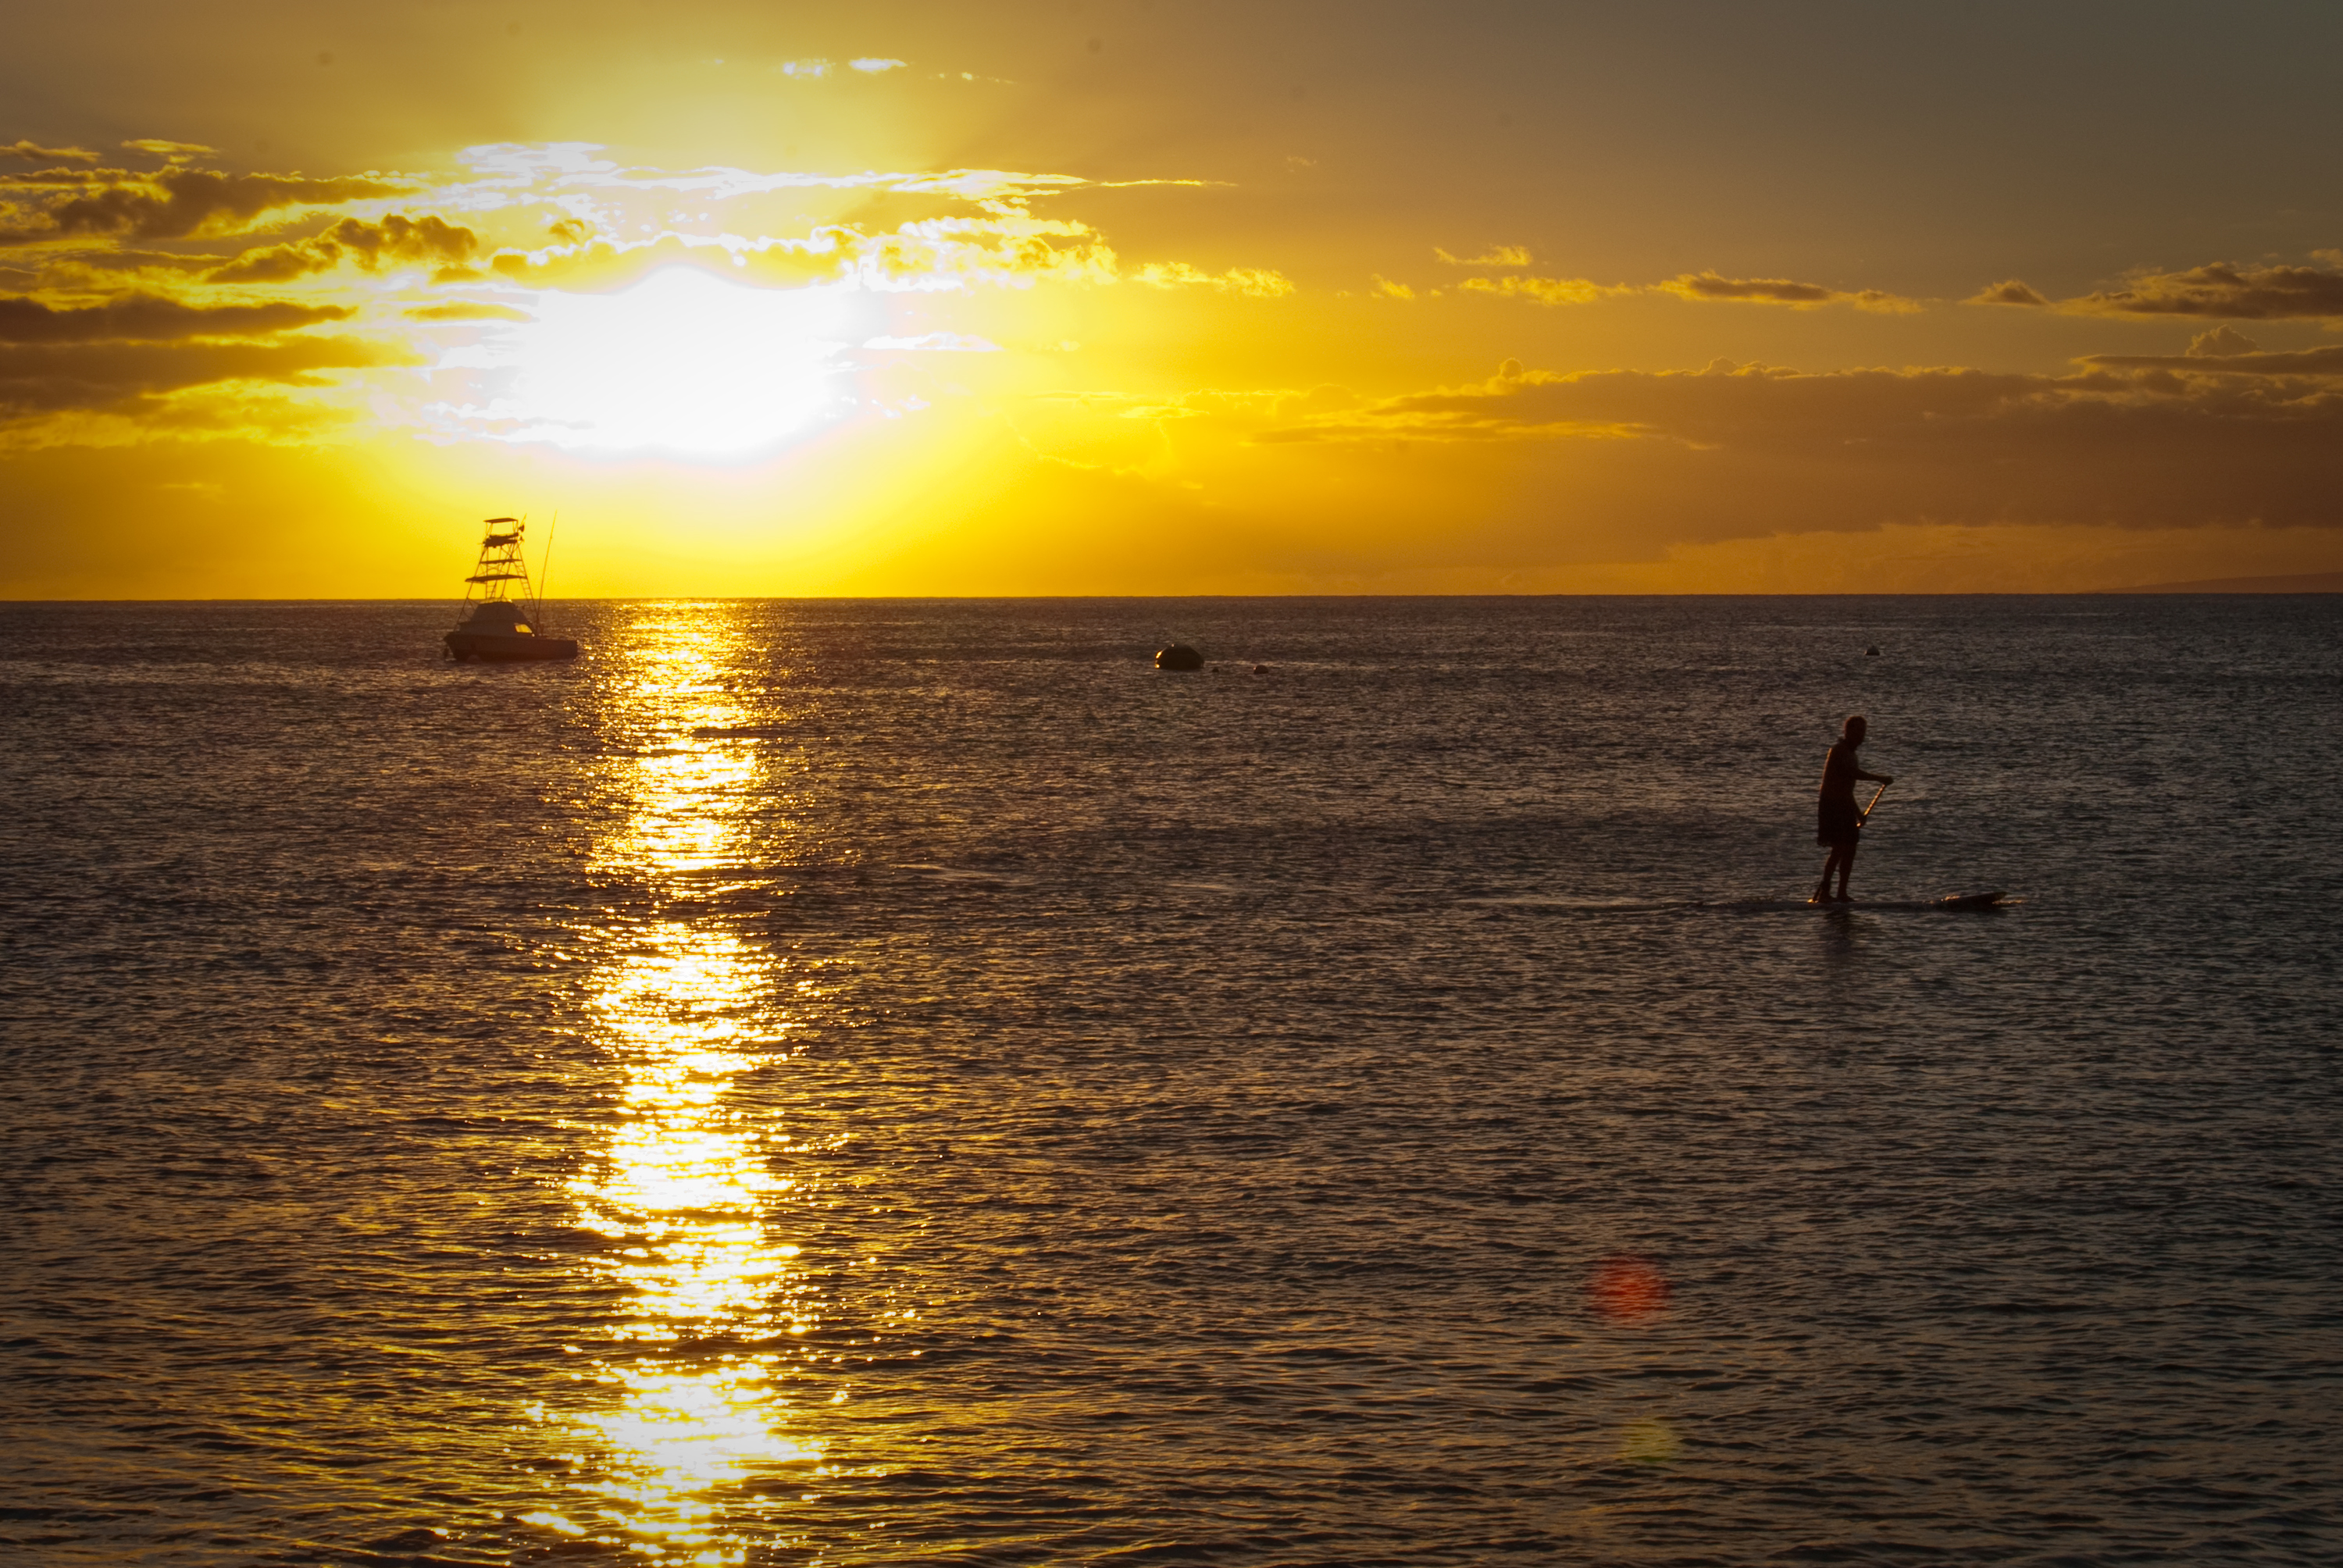 30-AUG-2013: Not many things better than a Maui sunset.